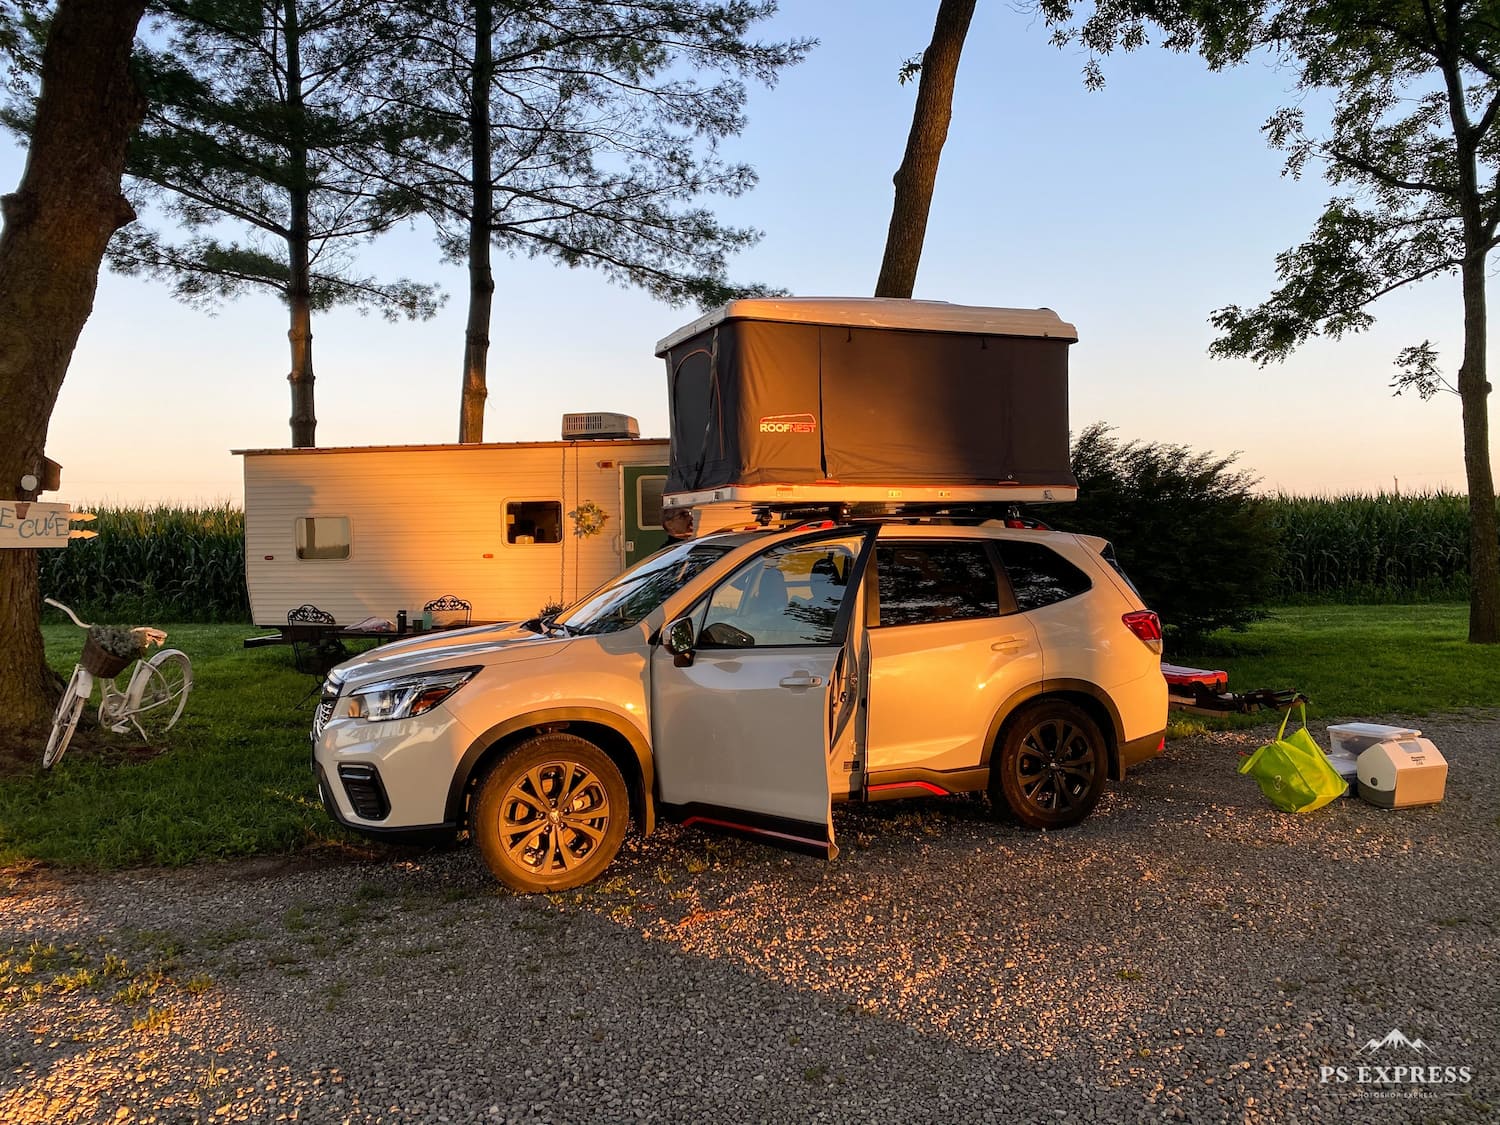 Golden hour at a wooded campsite with a car with a rooftop tent.